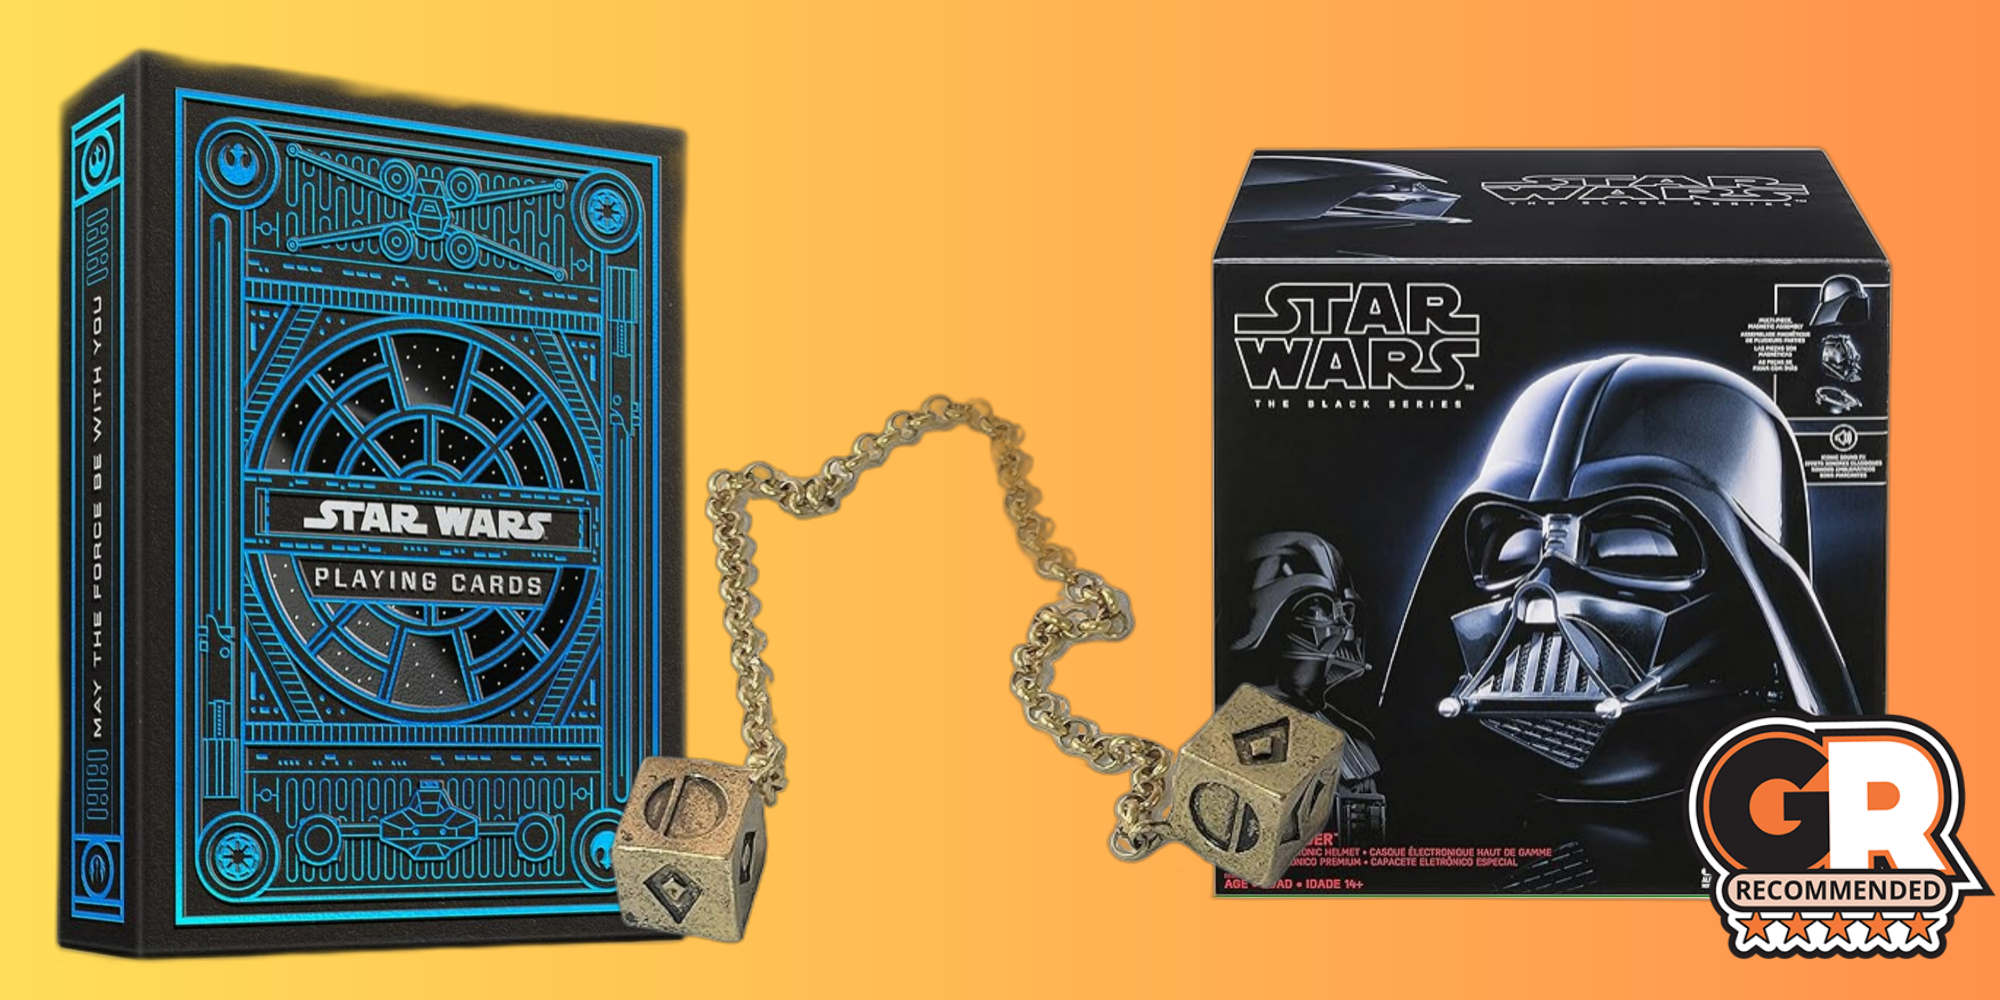 Star Wars Theory11 playing cards, replica of Han Solo's dice, and Darth Vader helmet on a orange gradient background with the Game ZXC Logo on the right hand side. 